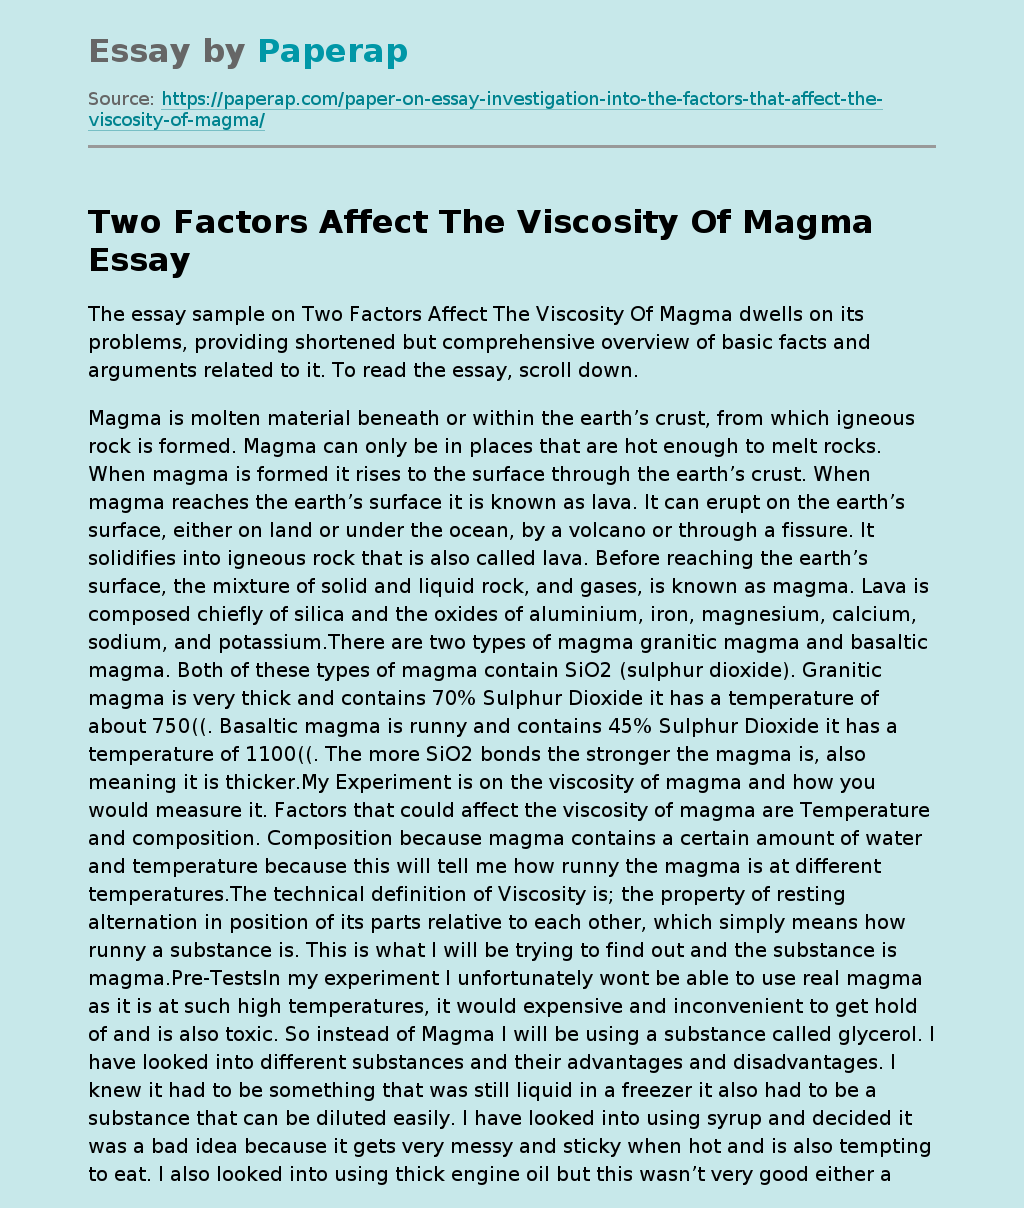 Two Factors Affect The Viscosity Of Magma